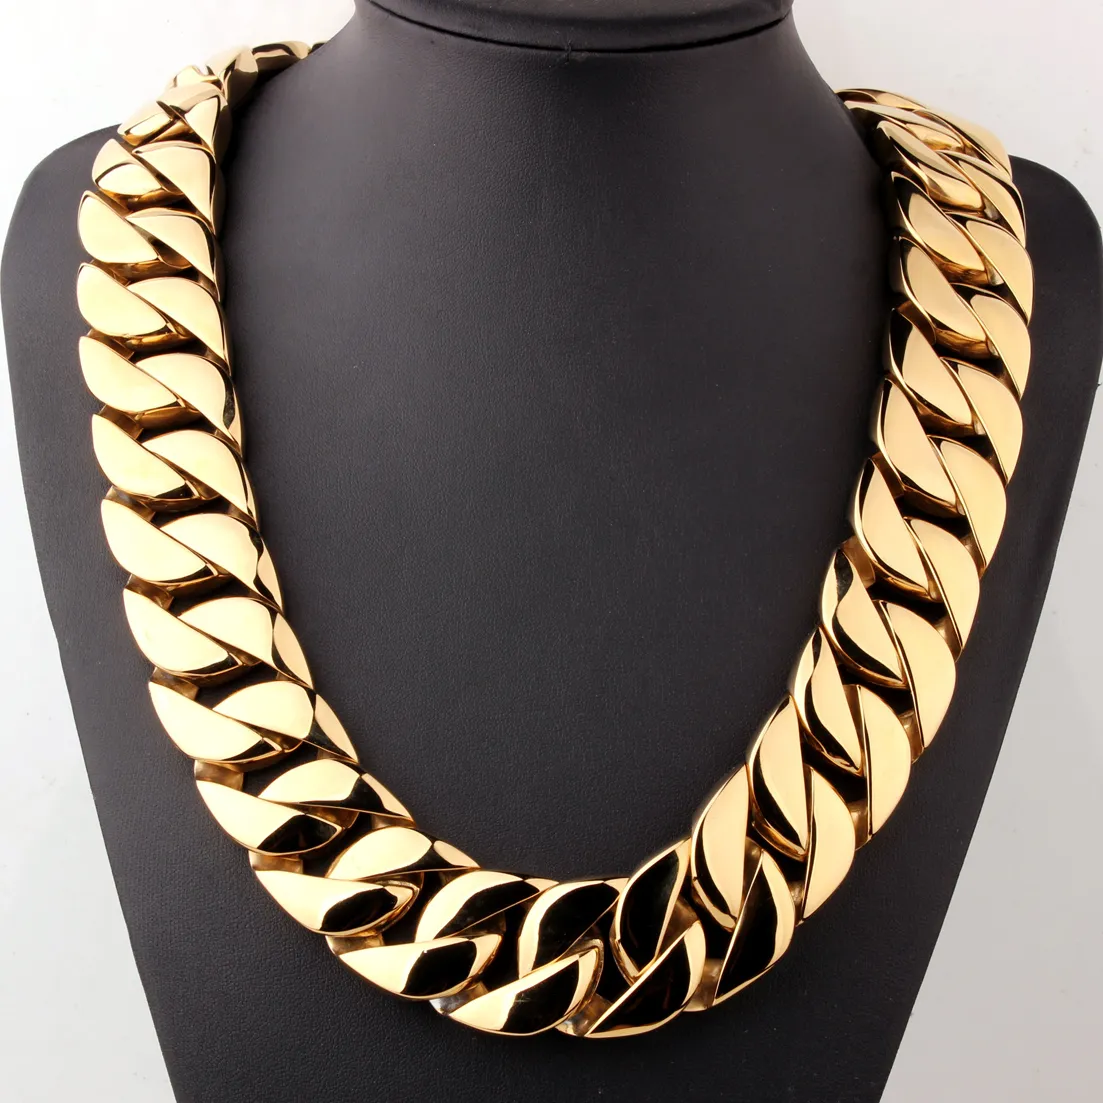 18K Gold Miami Cubaanse Ketting Mannen Hip Hop Rvs Sieraden Chunky Gold Necklaces247i